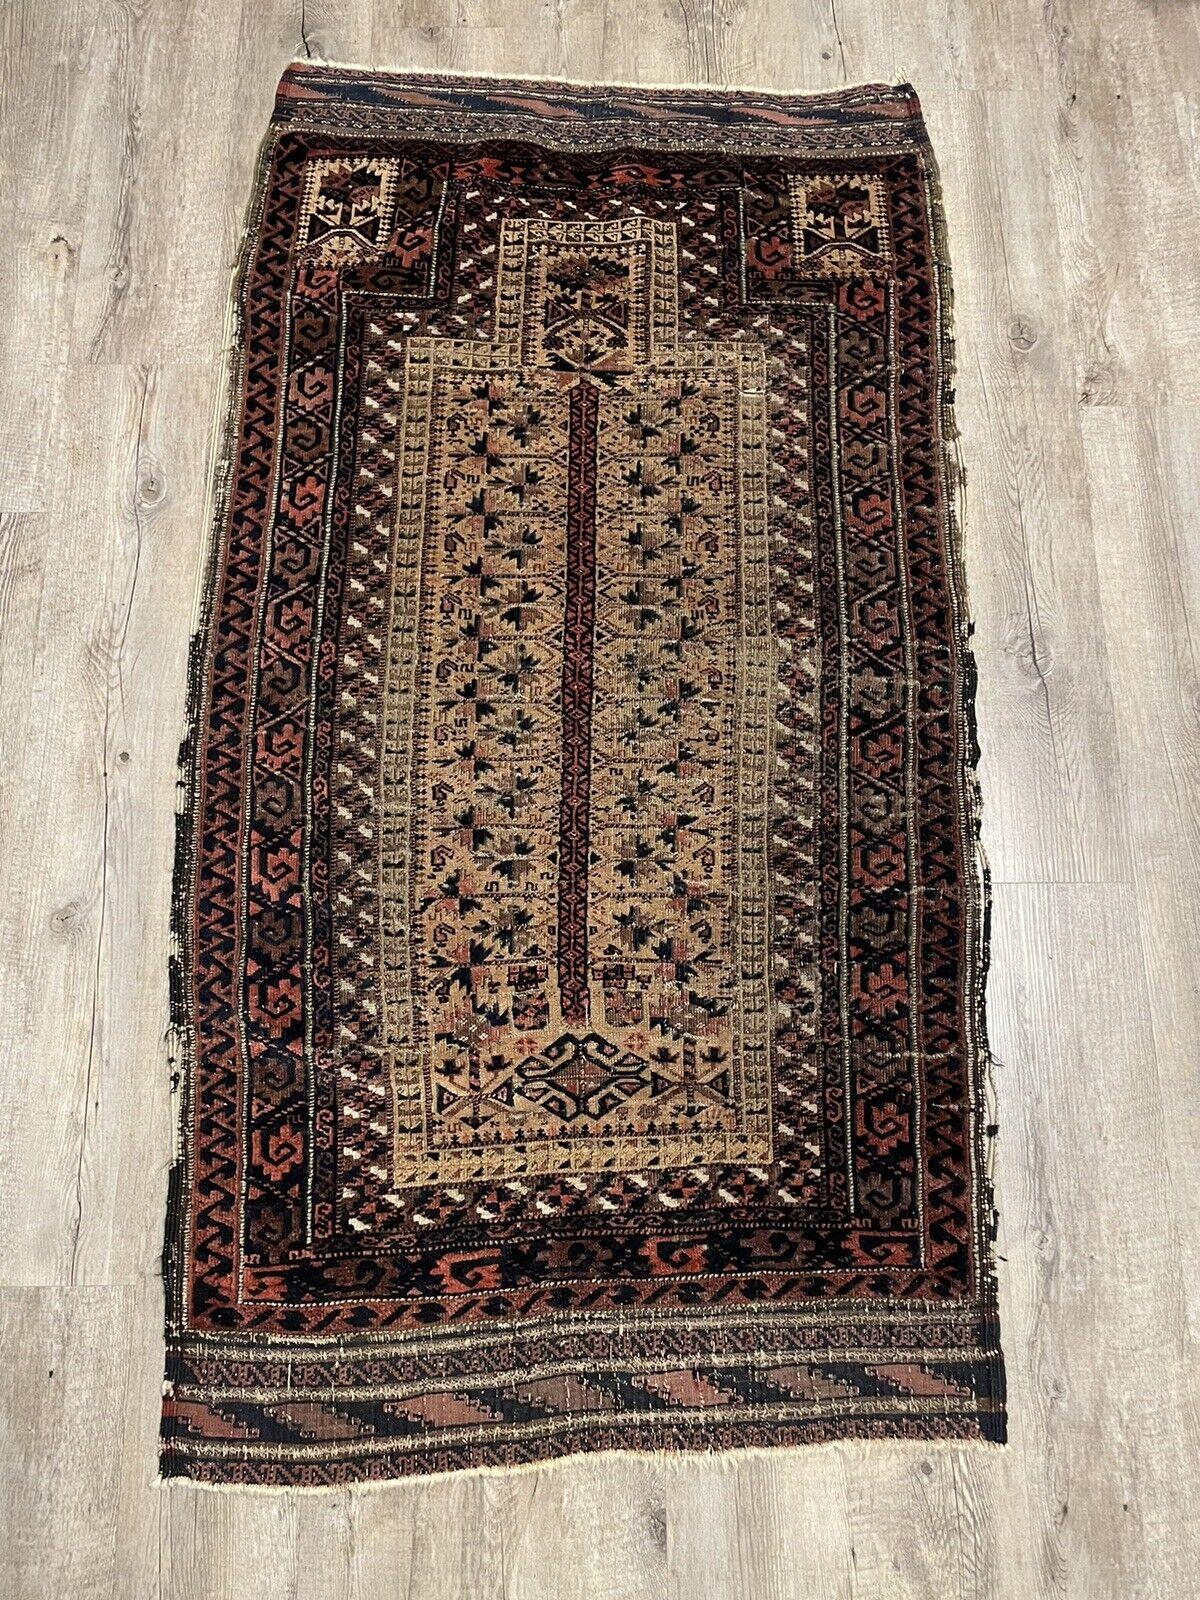 Wool Handmade Antique Afghan Baluch Collectible Rug 2.5' x 4.6', 1880s - 1N18 For Sale